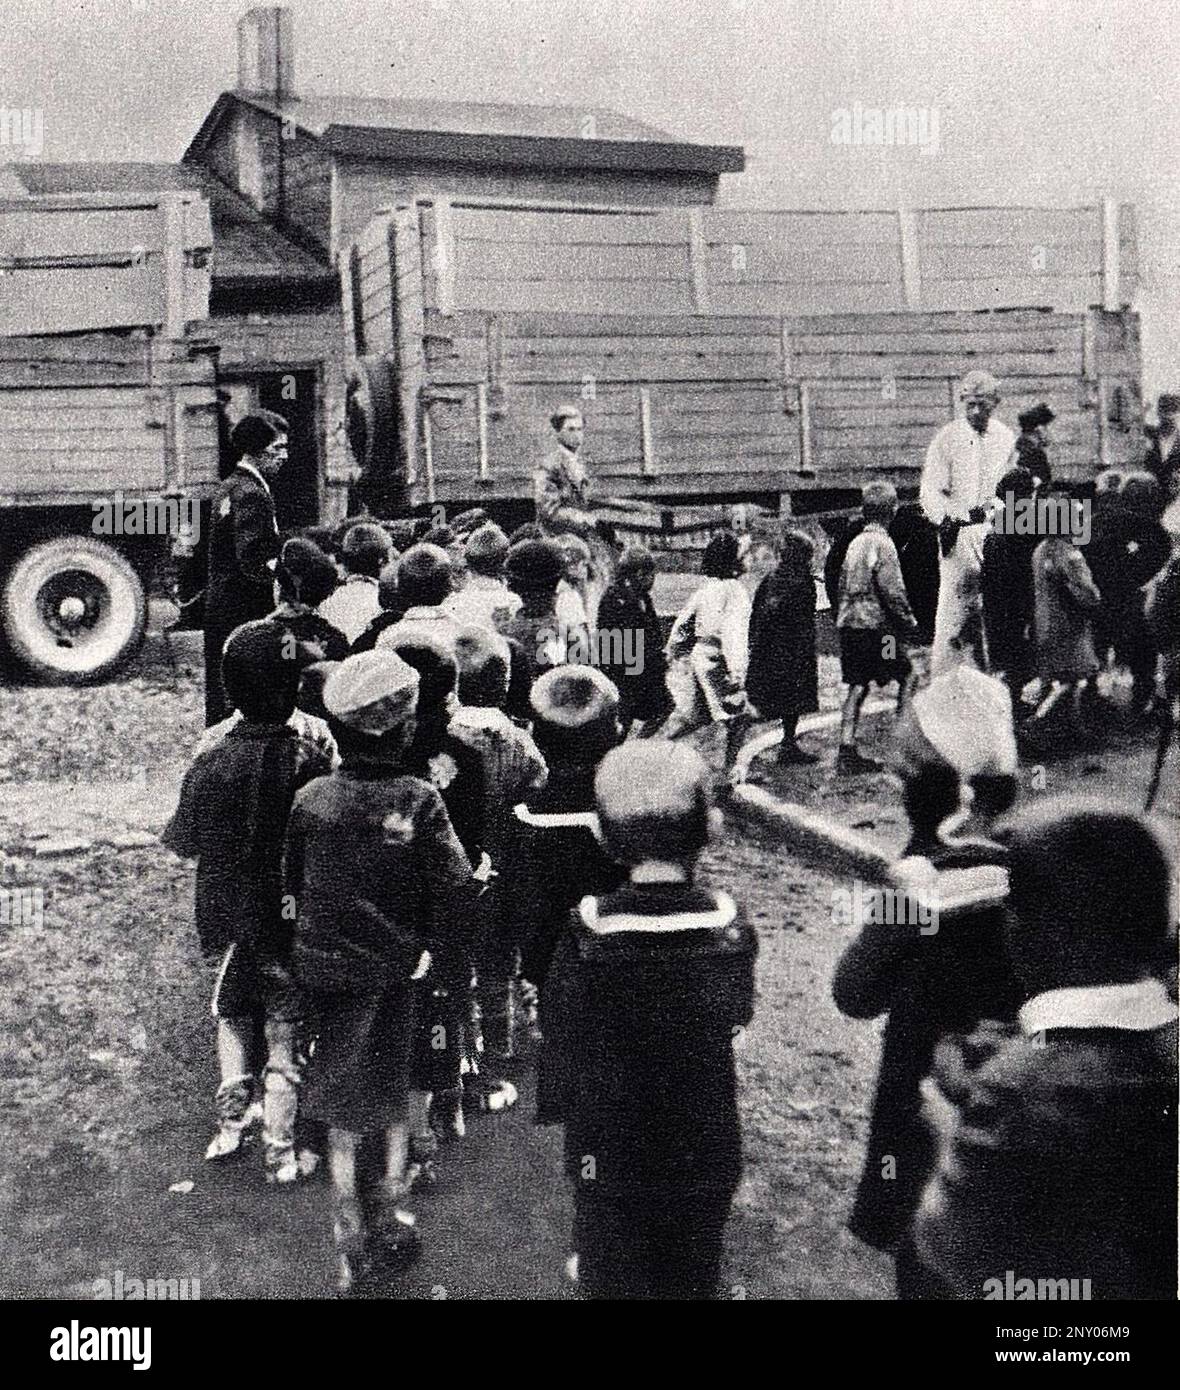 In the early stages of WW2 the Jews in nazi occupied europe were rounded up and forced into crowded ghettoes. When the decision was made to kill them all they were deported to extermination centres to be murdered. Here Lodz Ghetto children from the Marysin orphanage are lined up to be sent to Chelmno (Kulmhof) extermination camp. Stock Photo